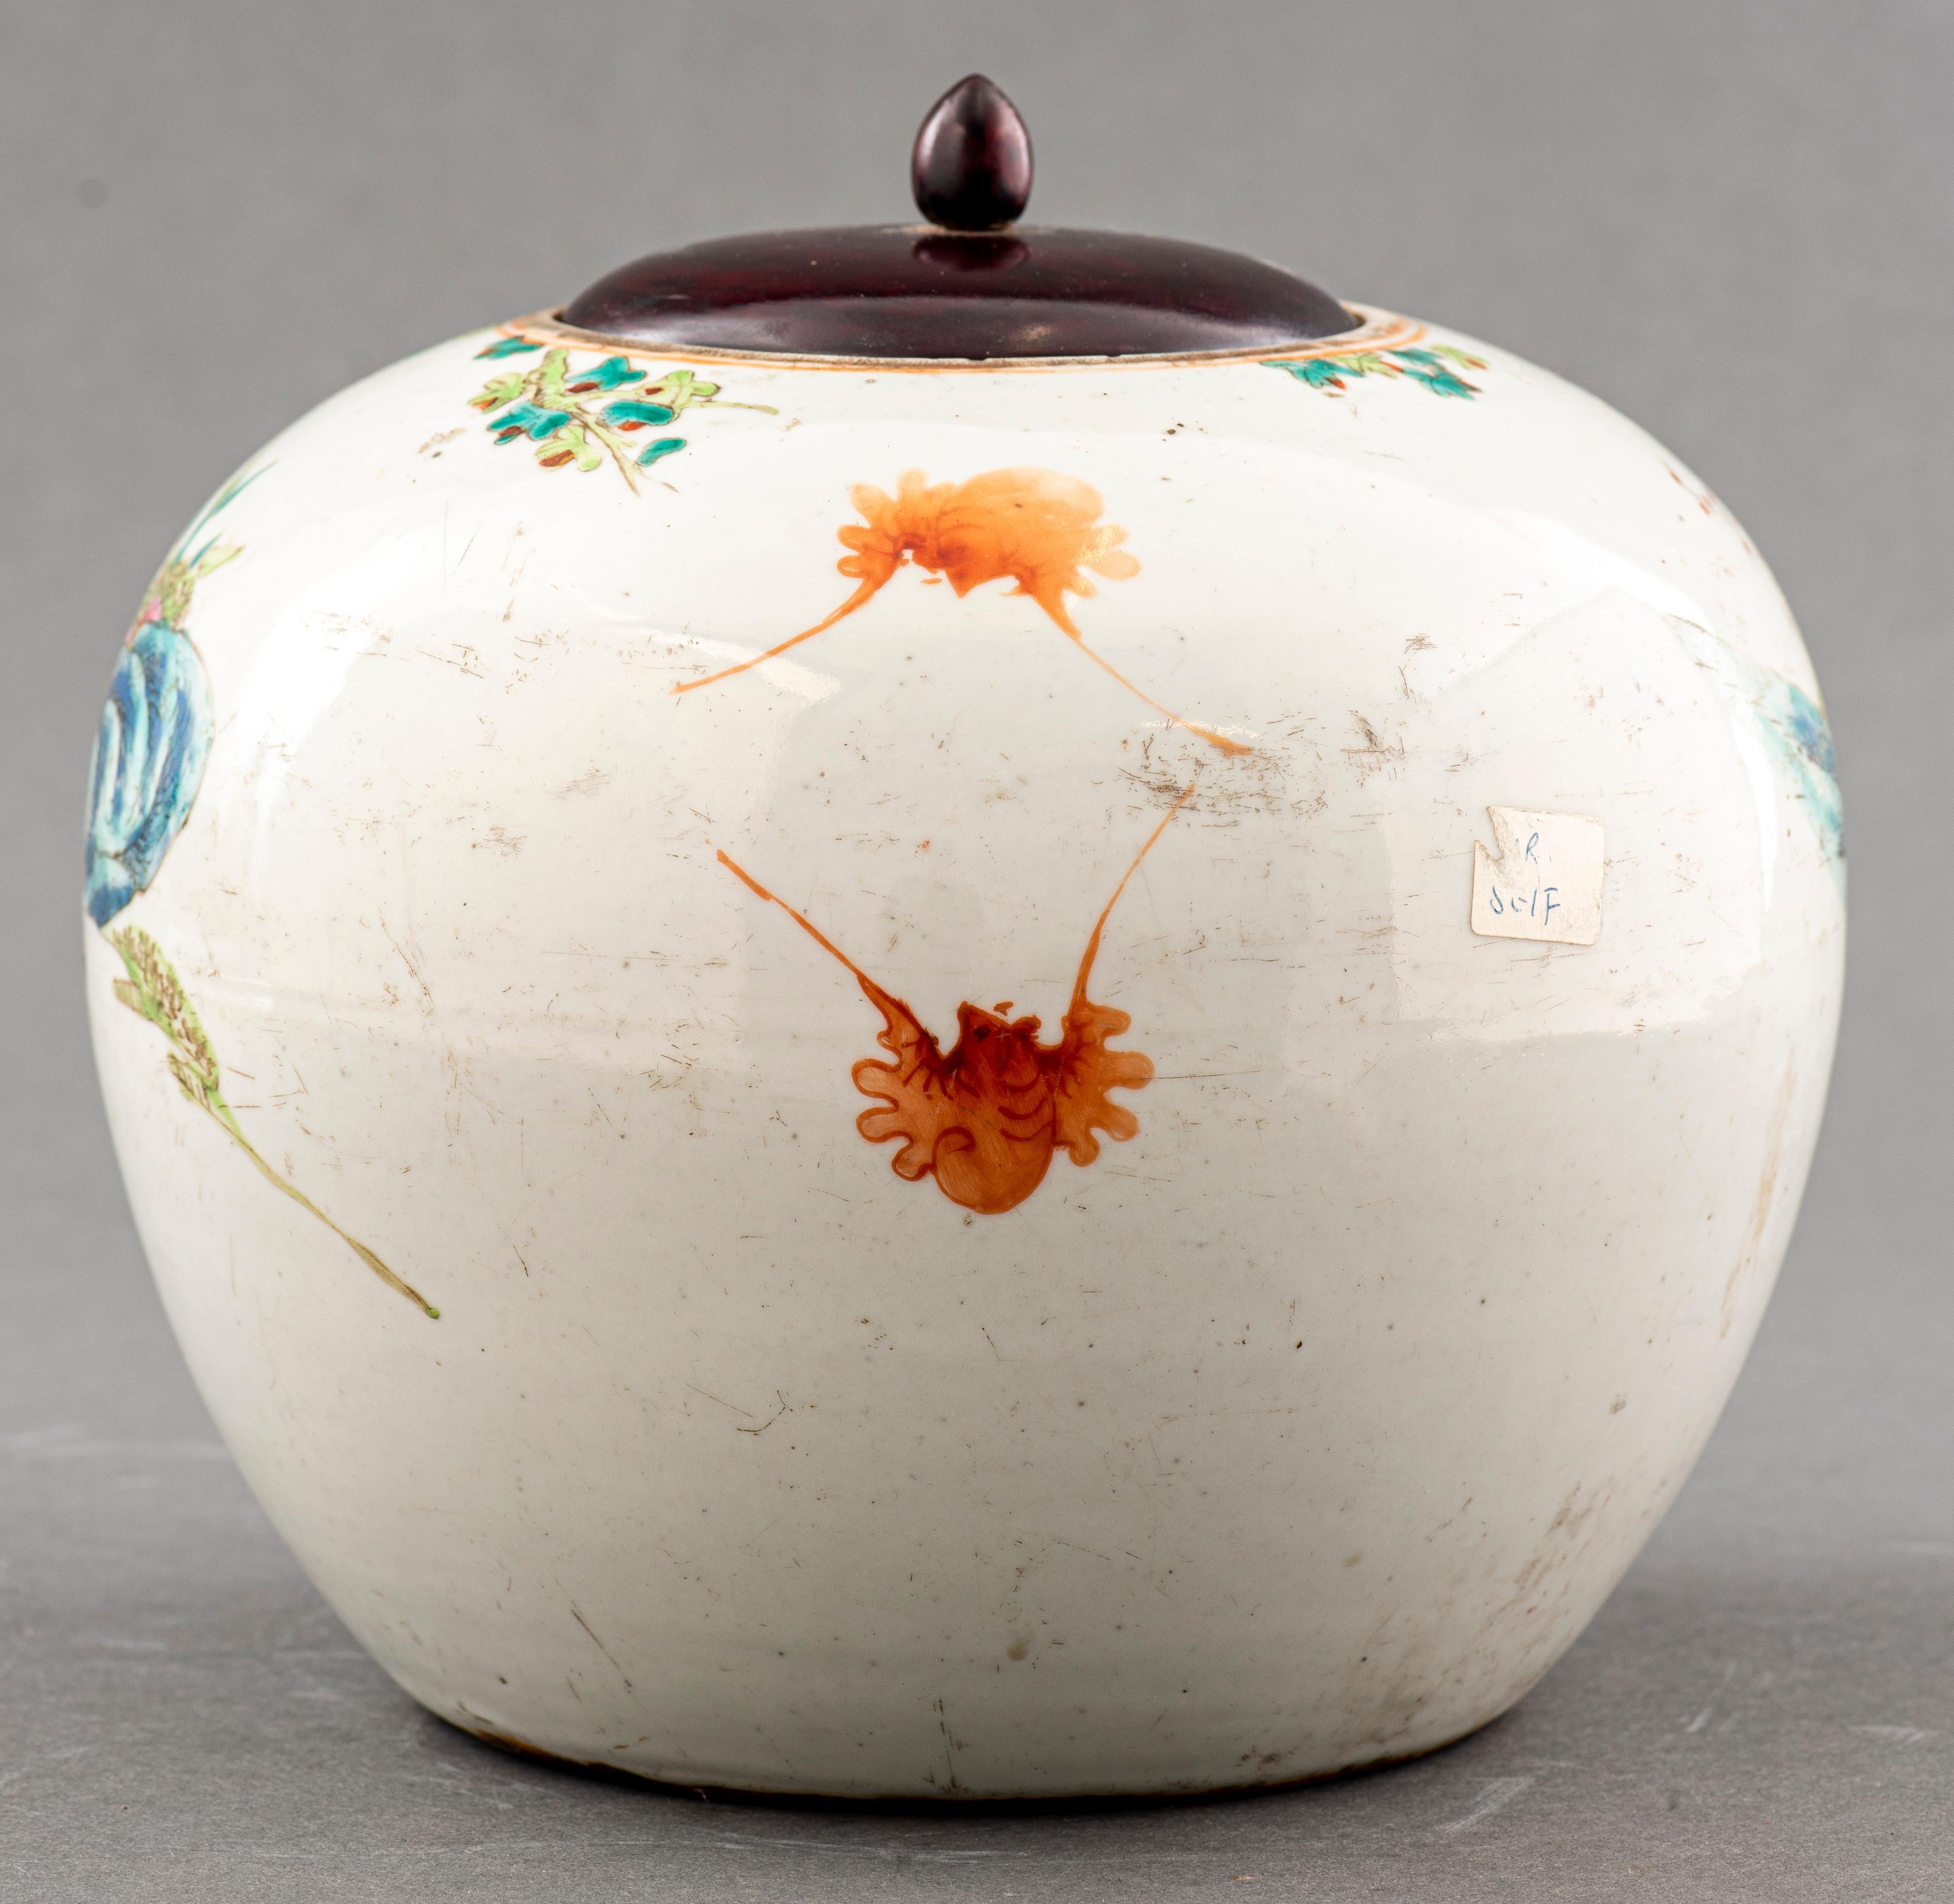 Chinese globular form jar, 19th century, with later wood lid, painted with various figures holding auspicious objects in a garden. 
Dimensions: 8.5” height x 10.25” diameter.